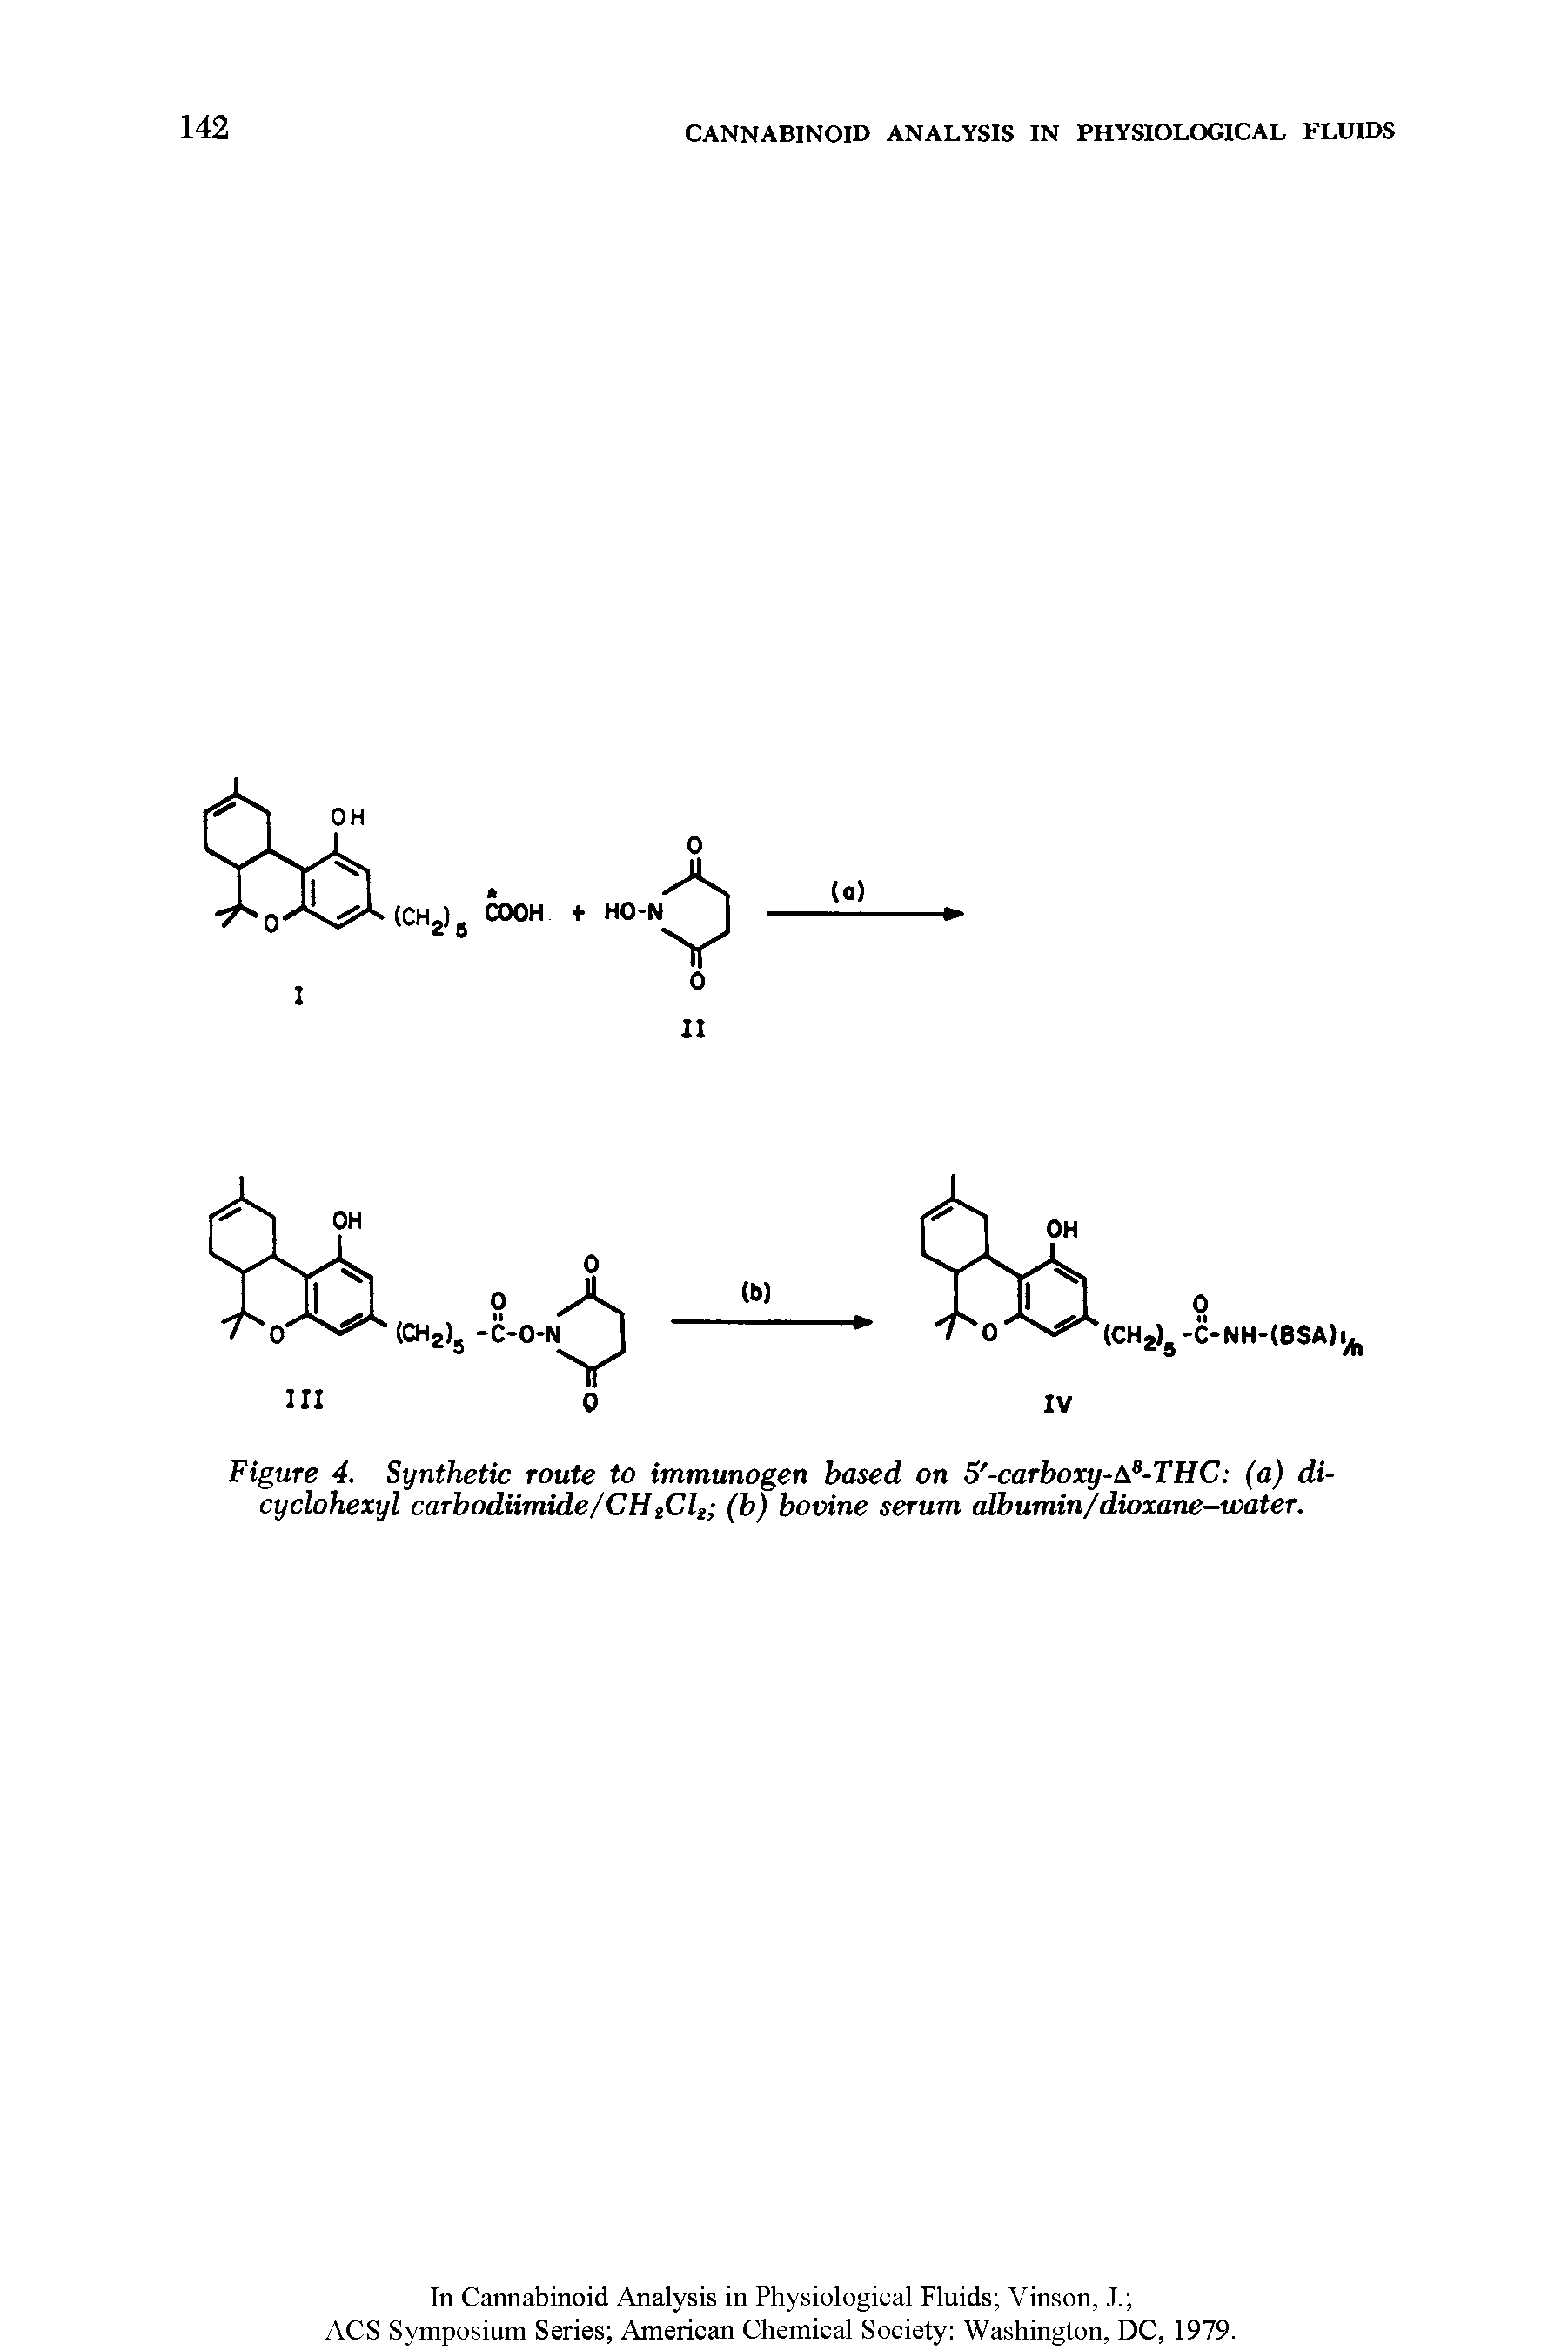 Figure 4. Synthetic route to immunogen based on 5 -carboxy-b -THC (a) dicyclohexyl carbodiimide/CHtCls (b) bovine serum albumin/dioxane-uxiter.